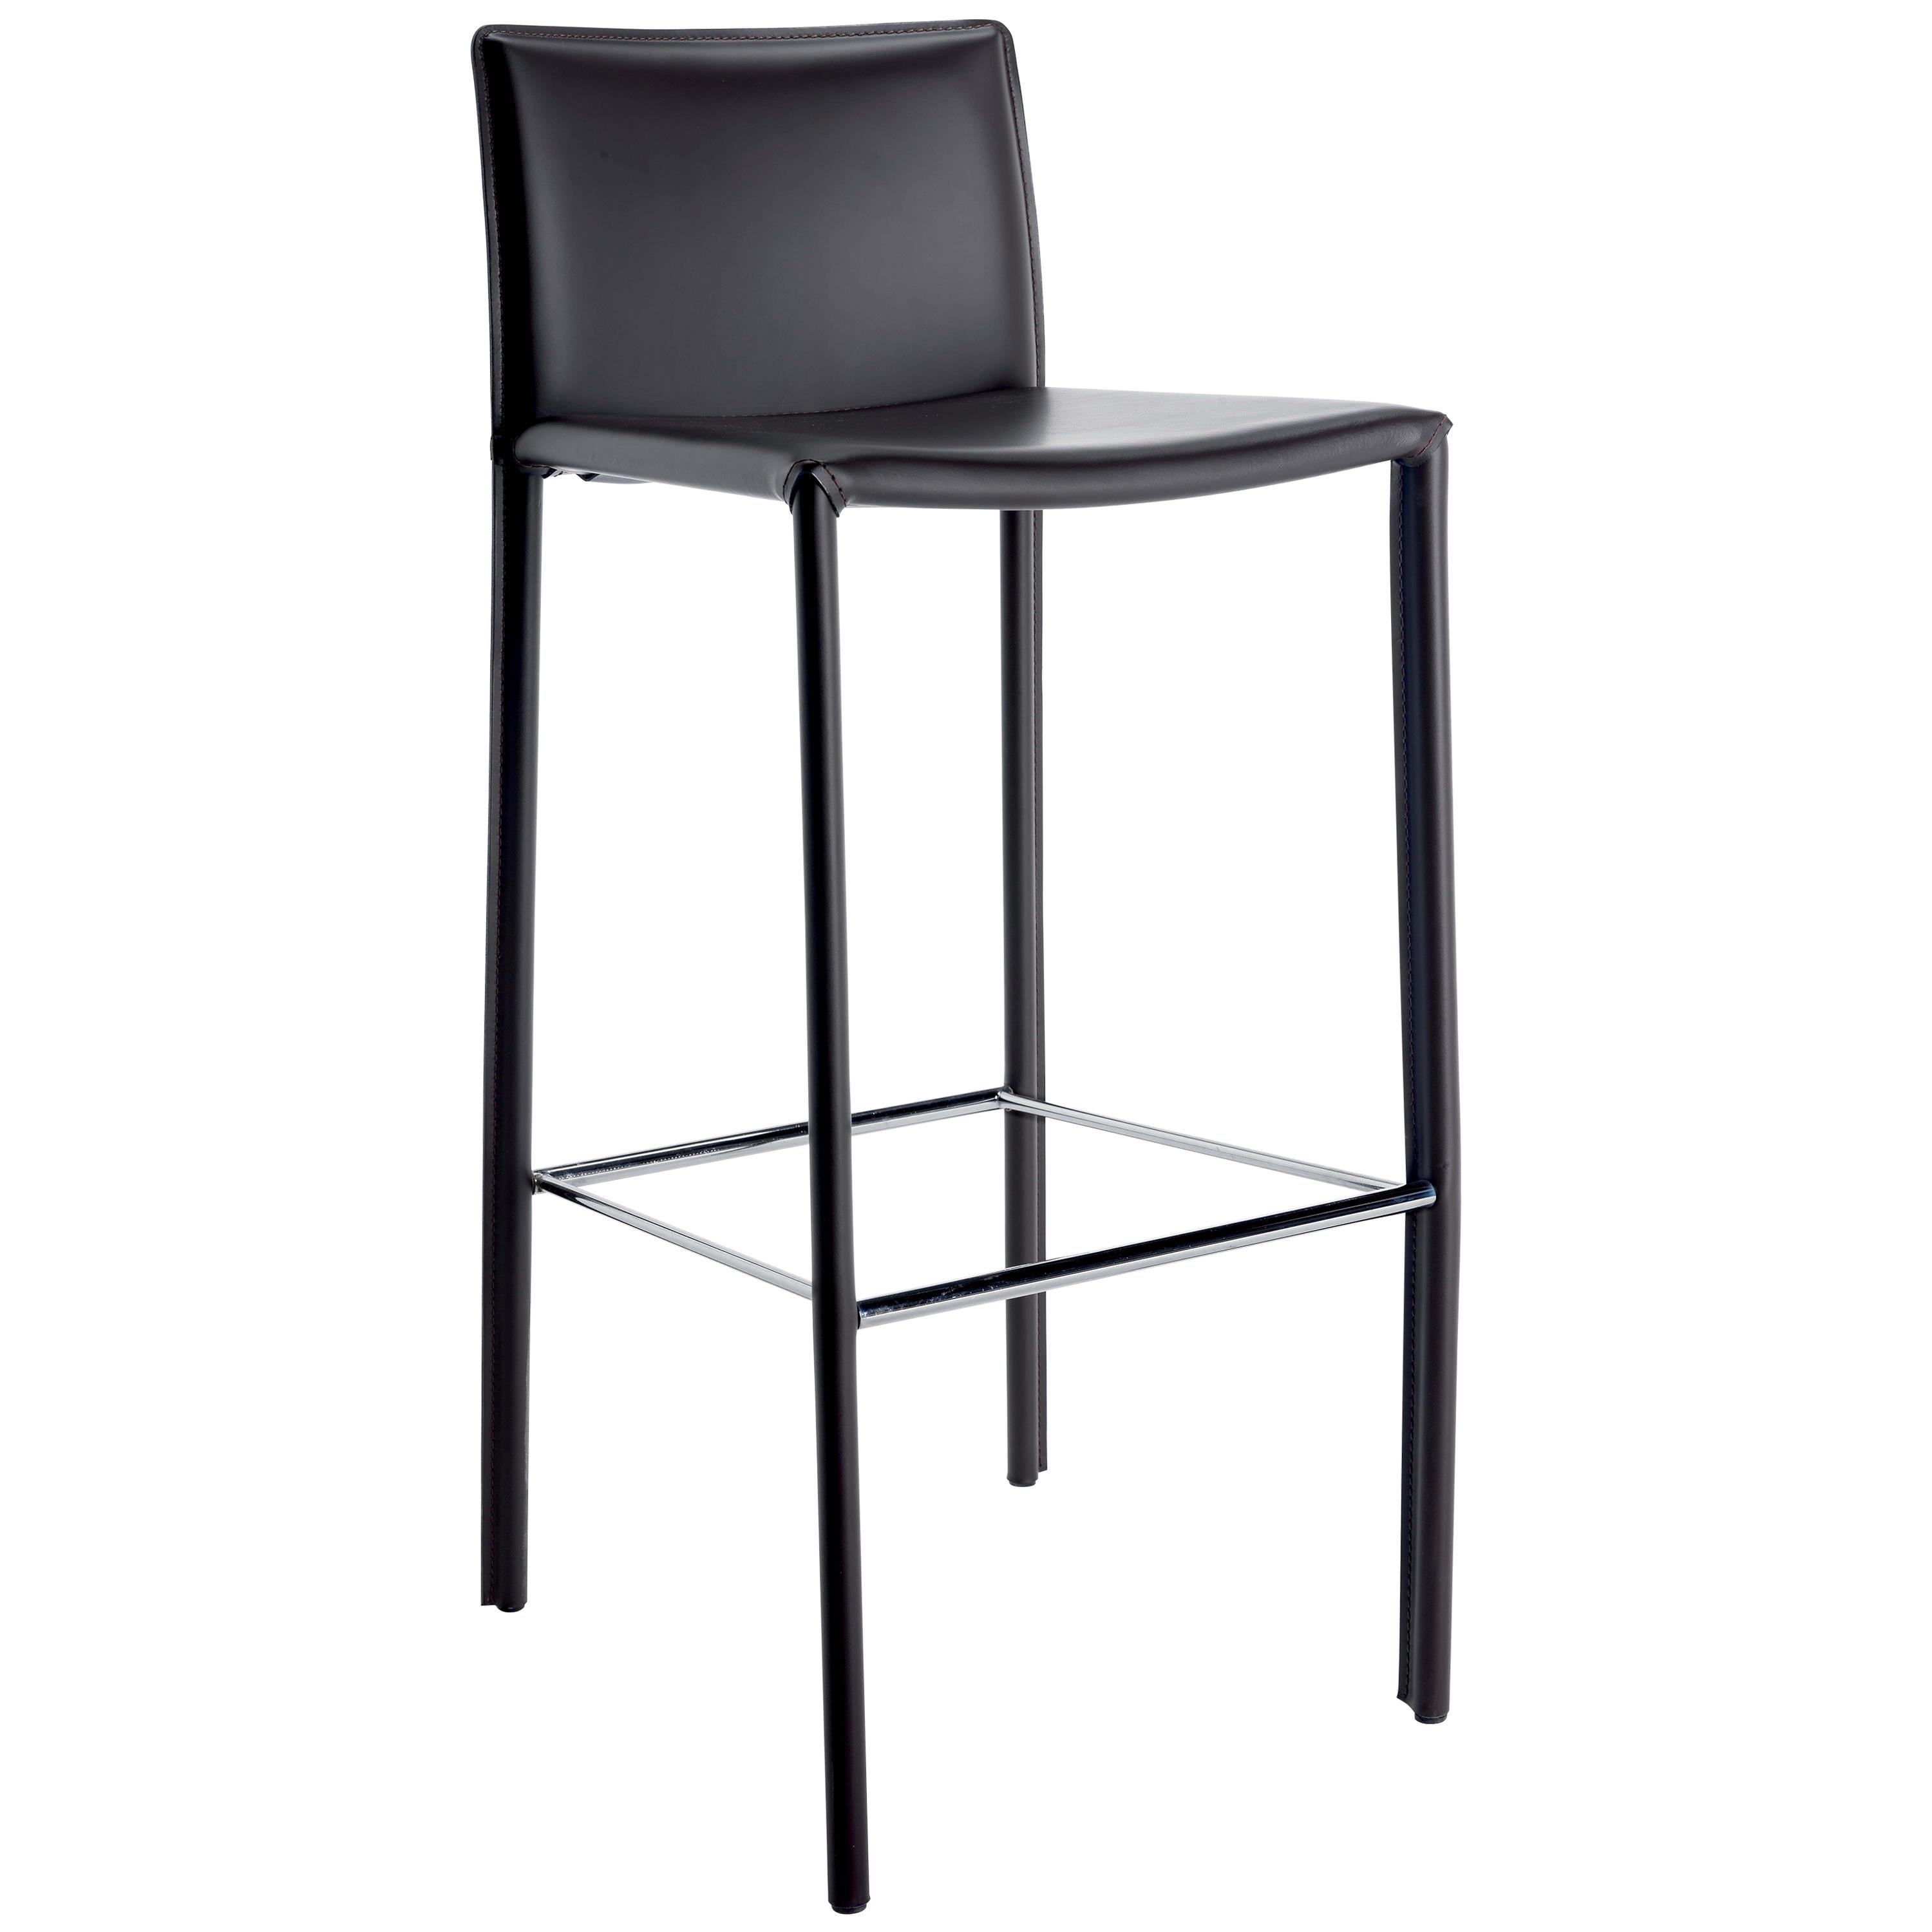 Gebrüder Thonet Vienna GmbH Twiggy Large Chair in Black and Backrest For Sale